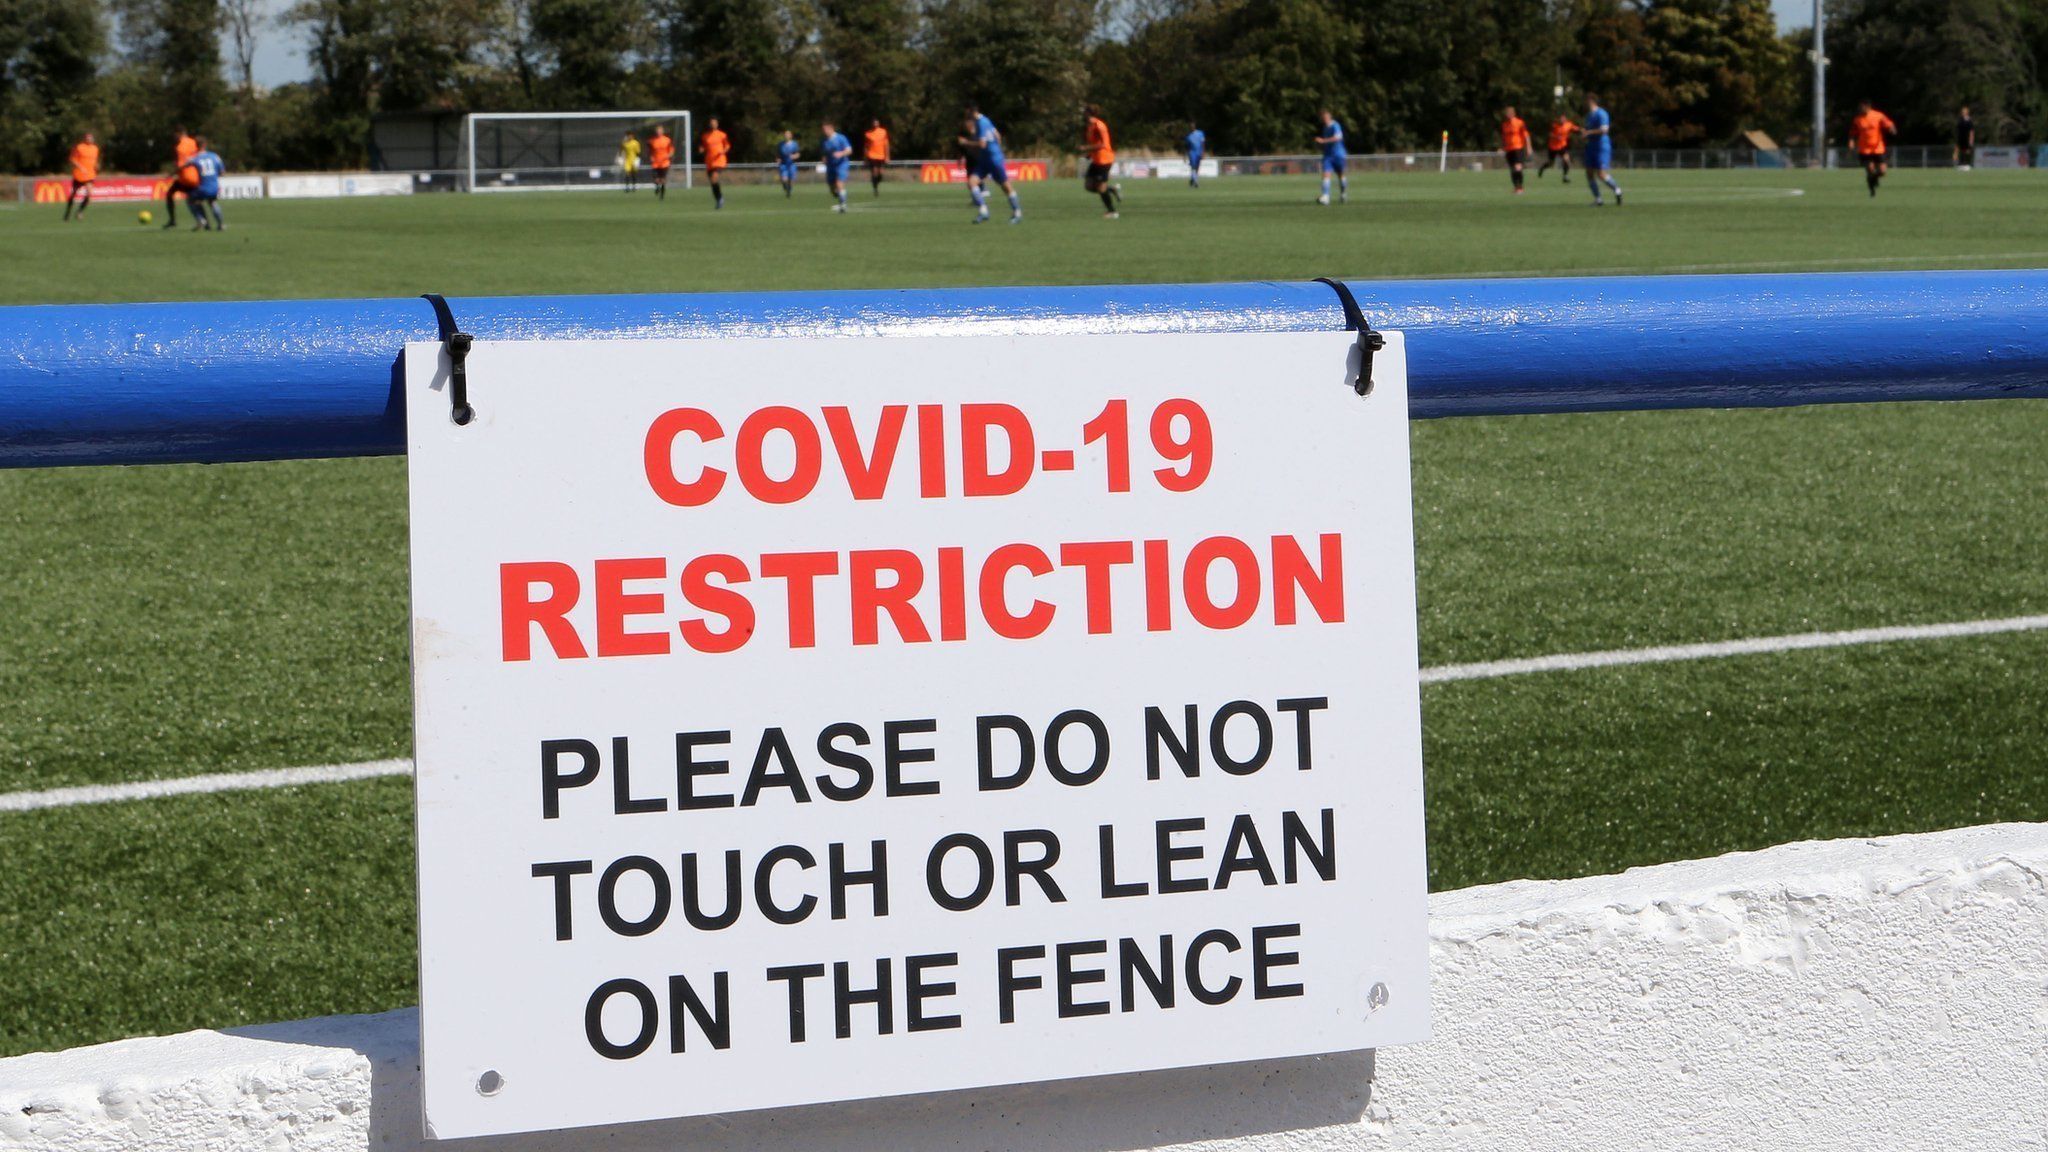 A Covid-19 restriction sign advising fans not to touch or lean on the fence as fans return to non-league football